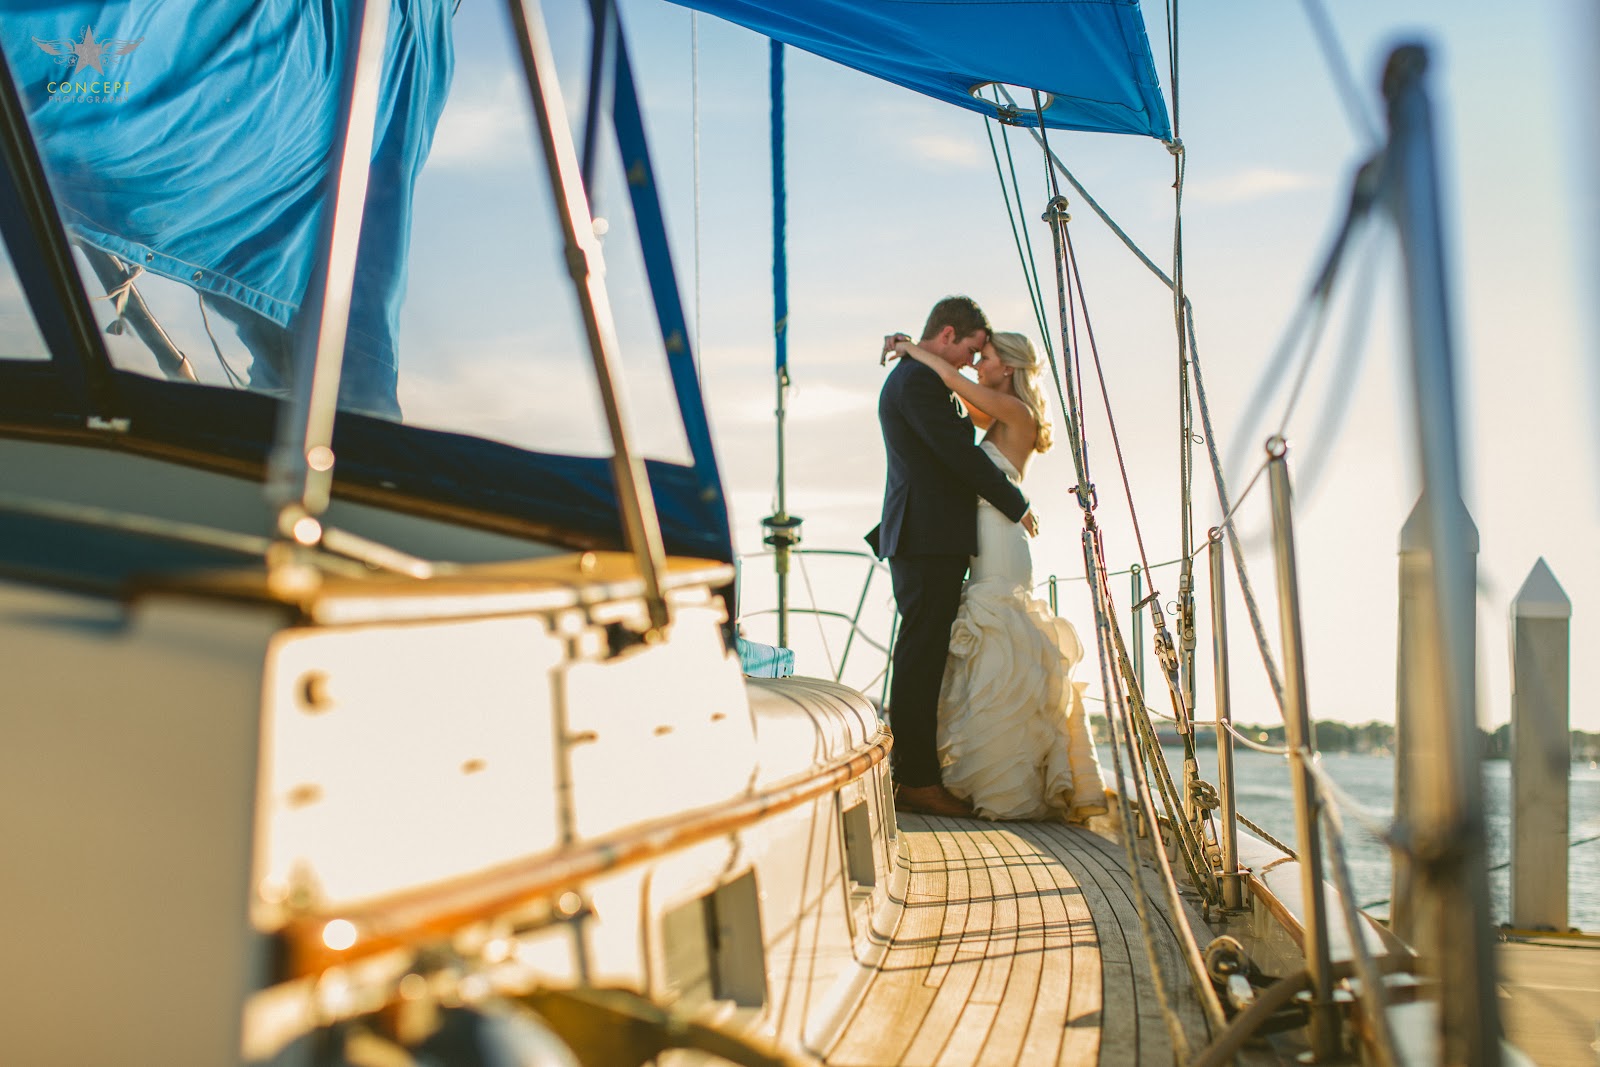 wedding couple on a boat